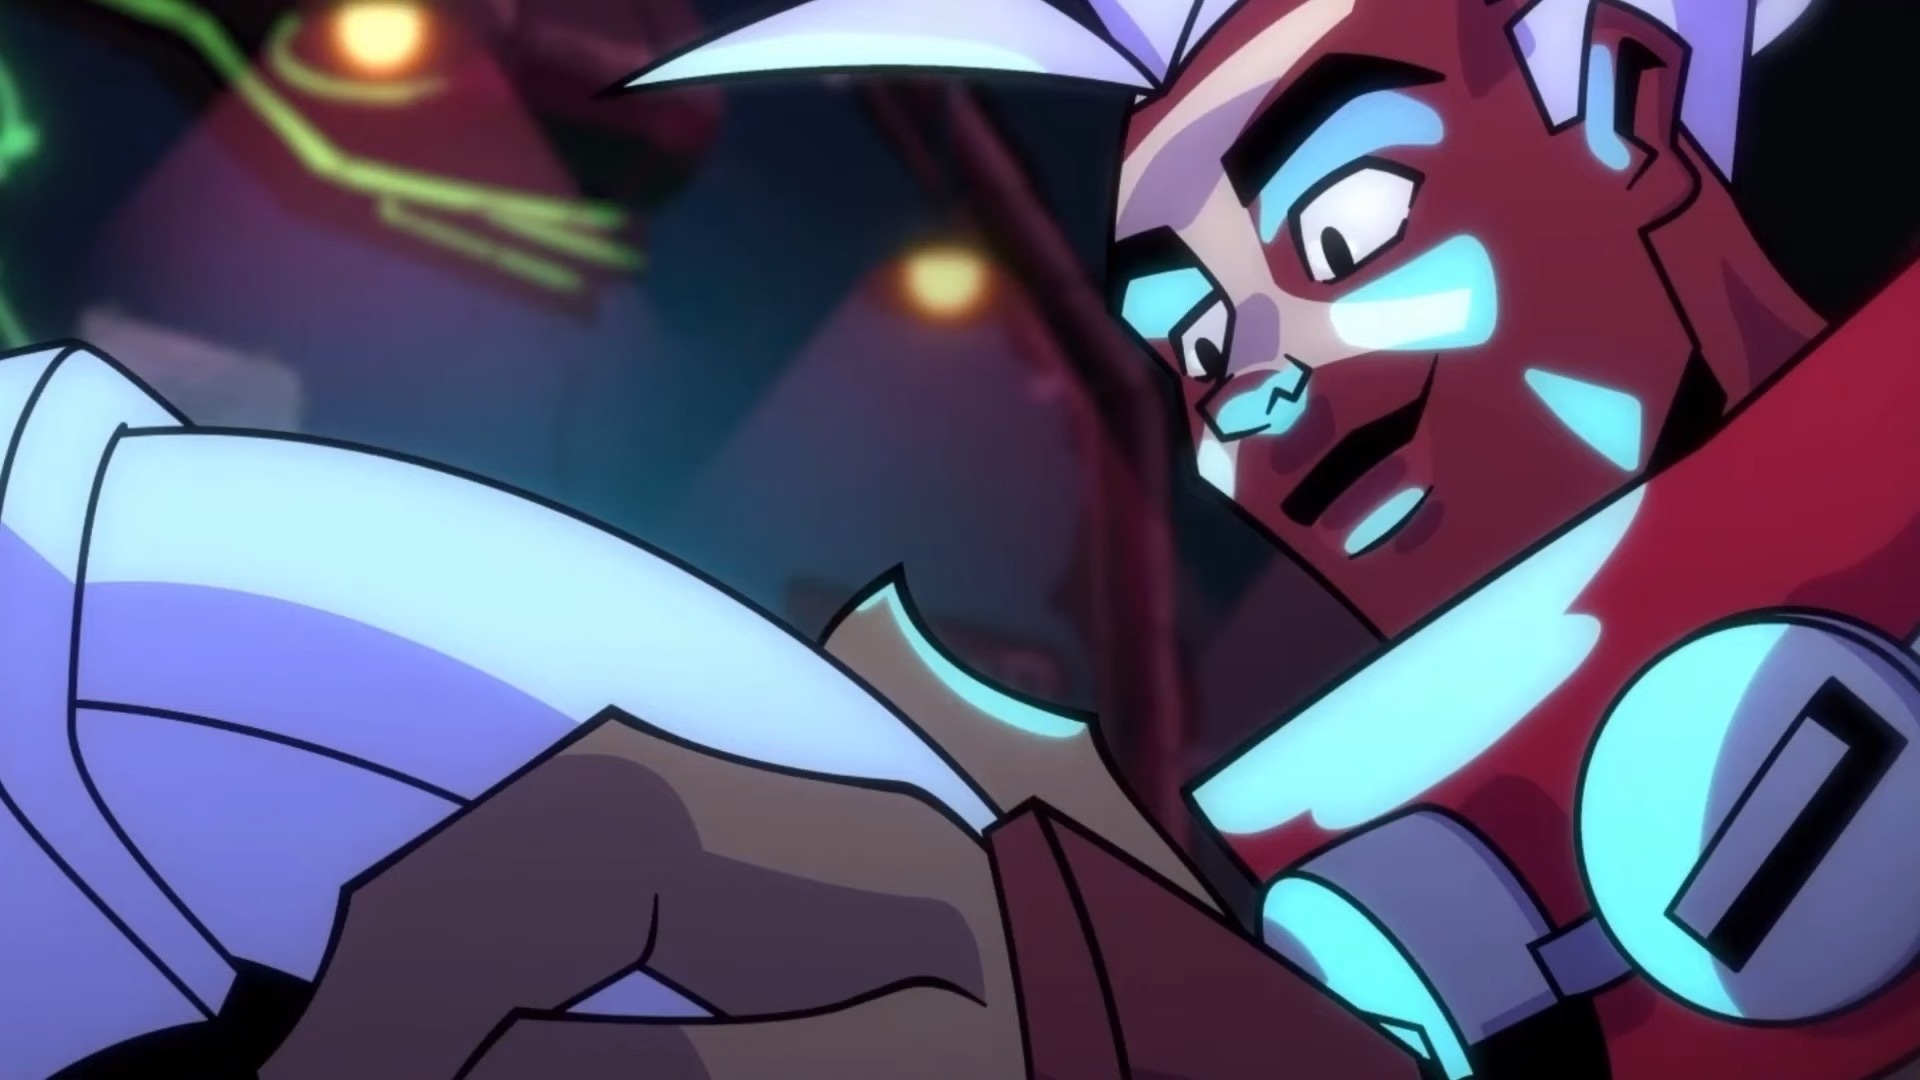 Go back in time at any time! Action game derivative “League of Legends” “ League of Legends: Convergence” has released the latest trailer “CONV / RGENCE: a League of Legends Story”